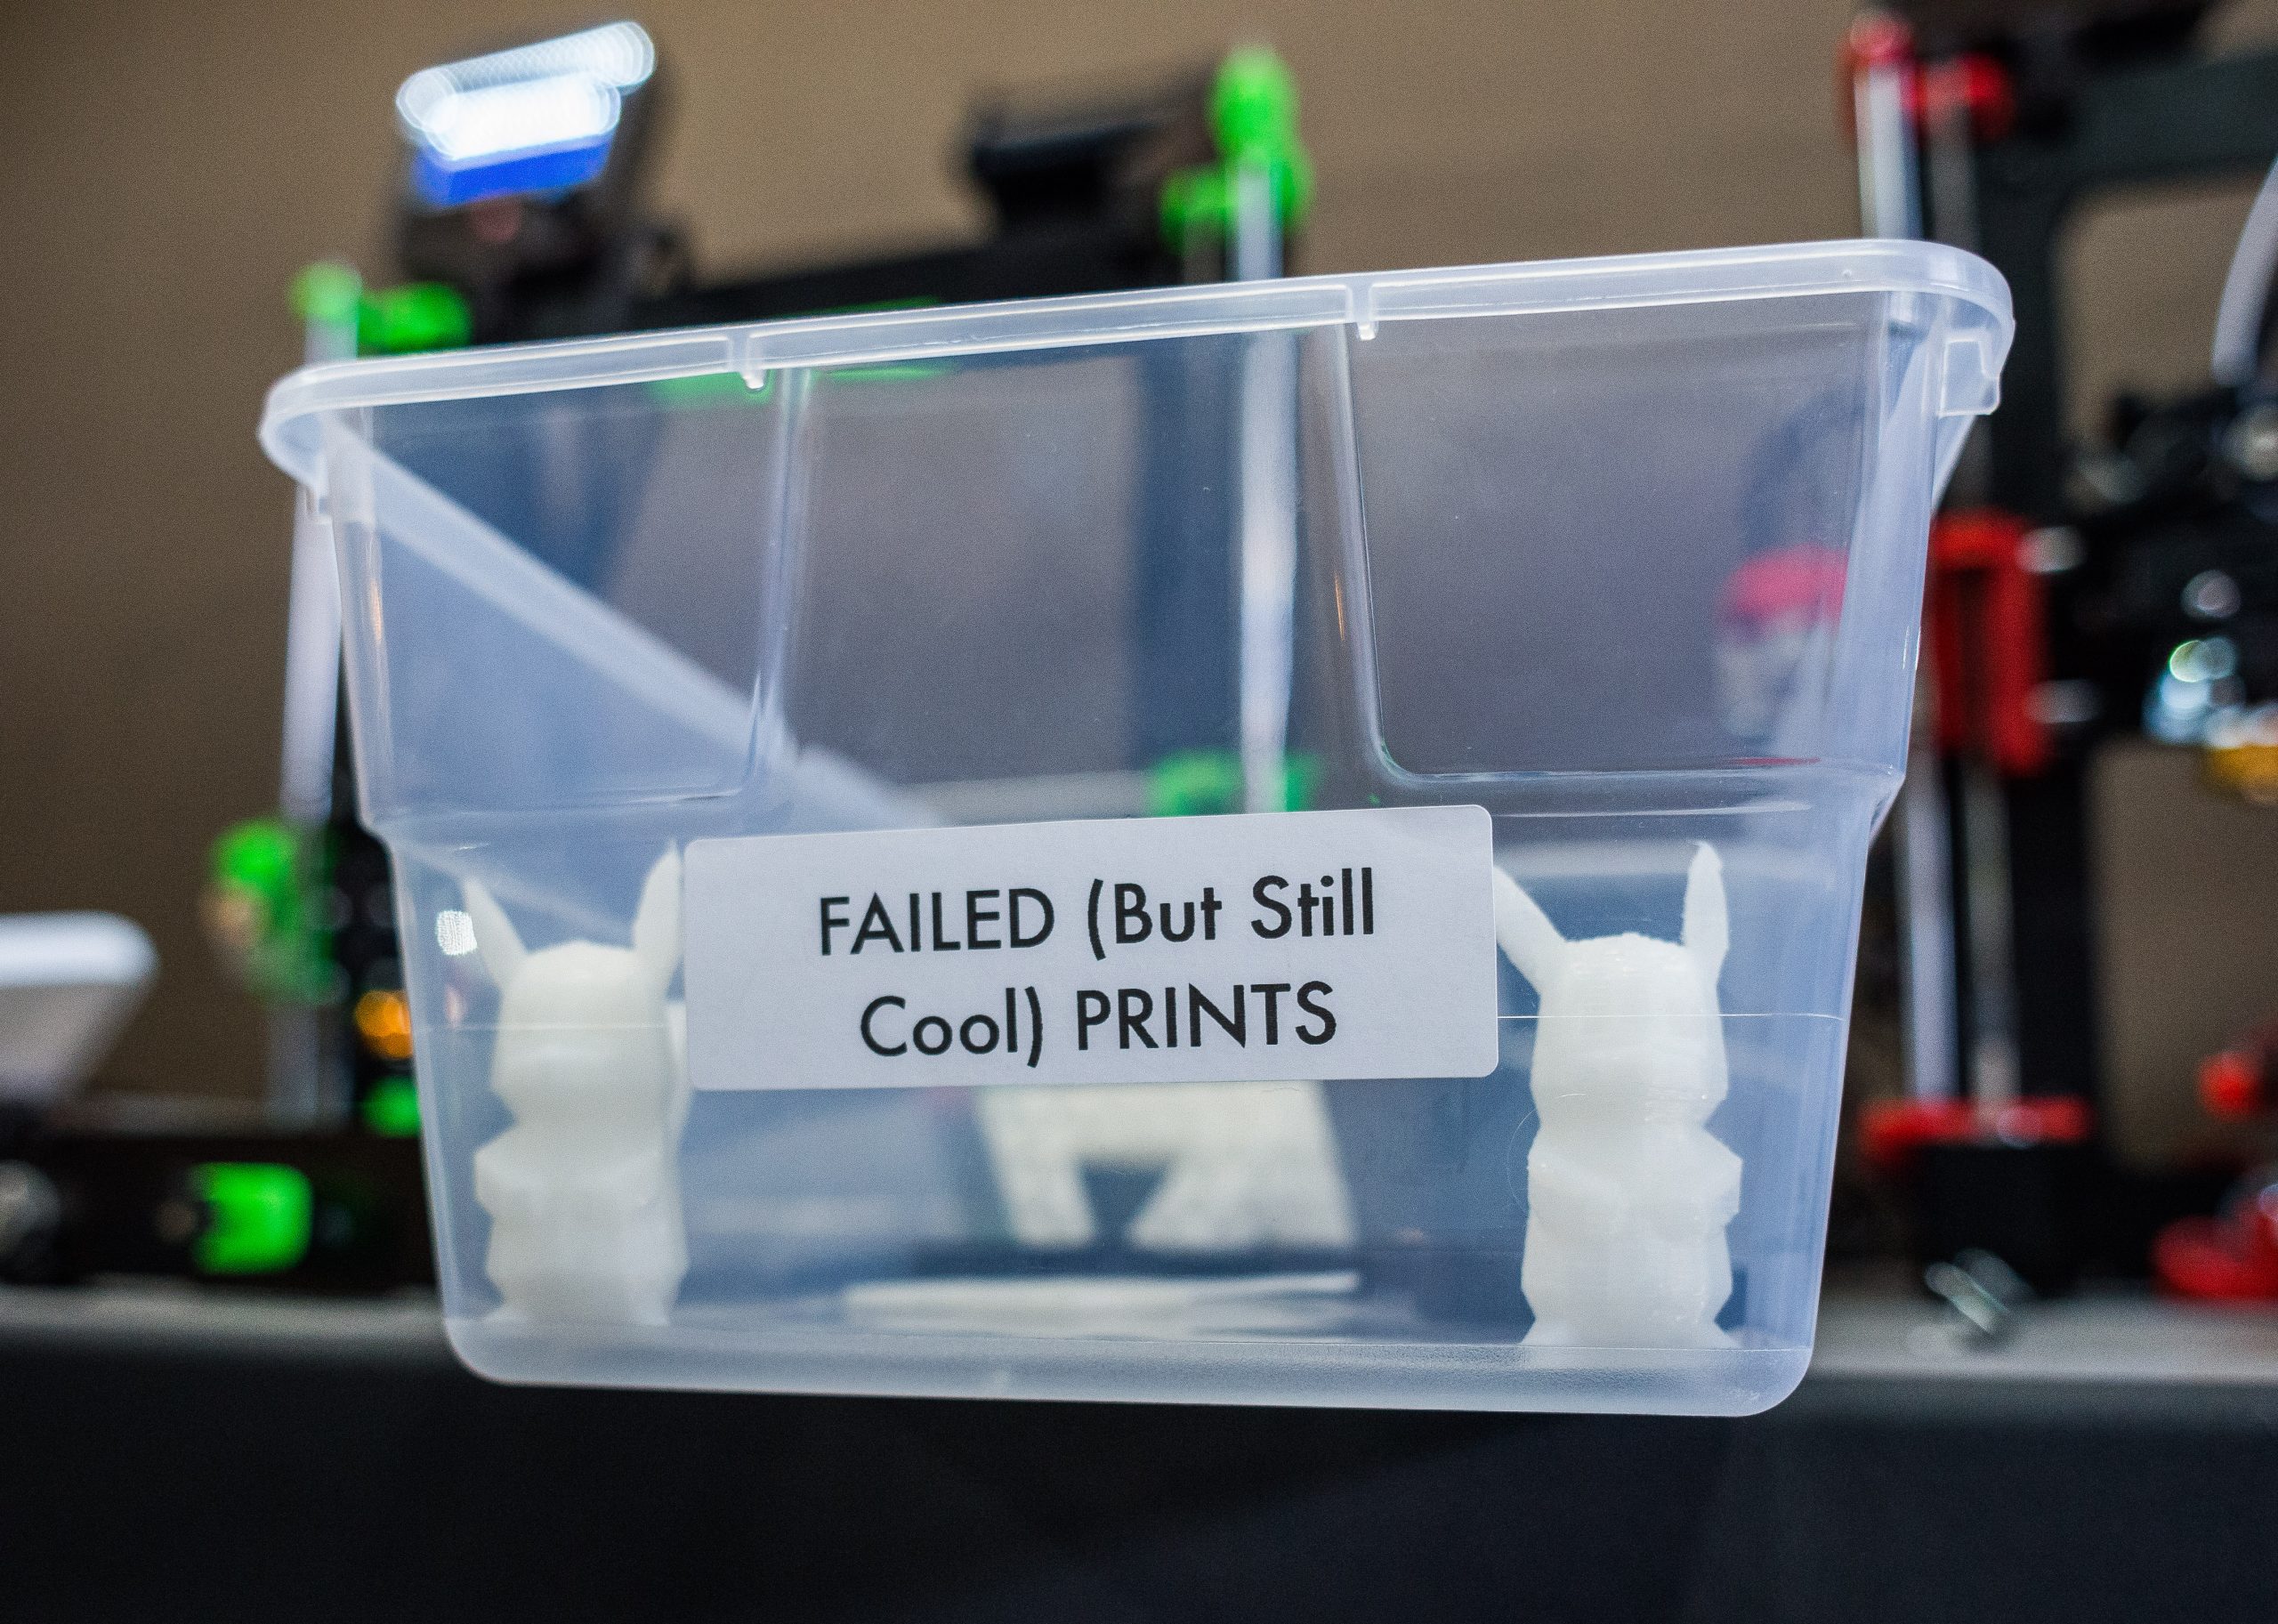 A clear plastic box with the label "Failed (but still cool) prints" contains small 3D printed objects and sits in front of two 3D printers.